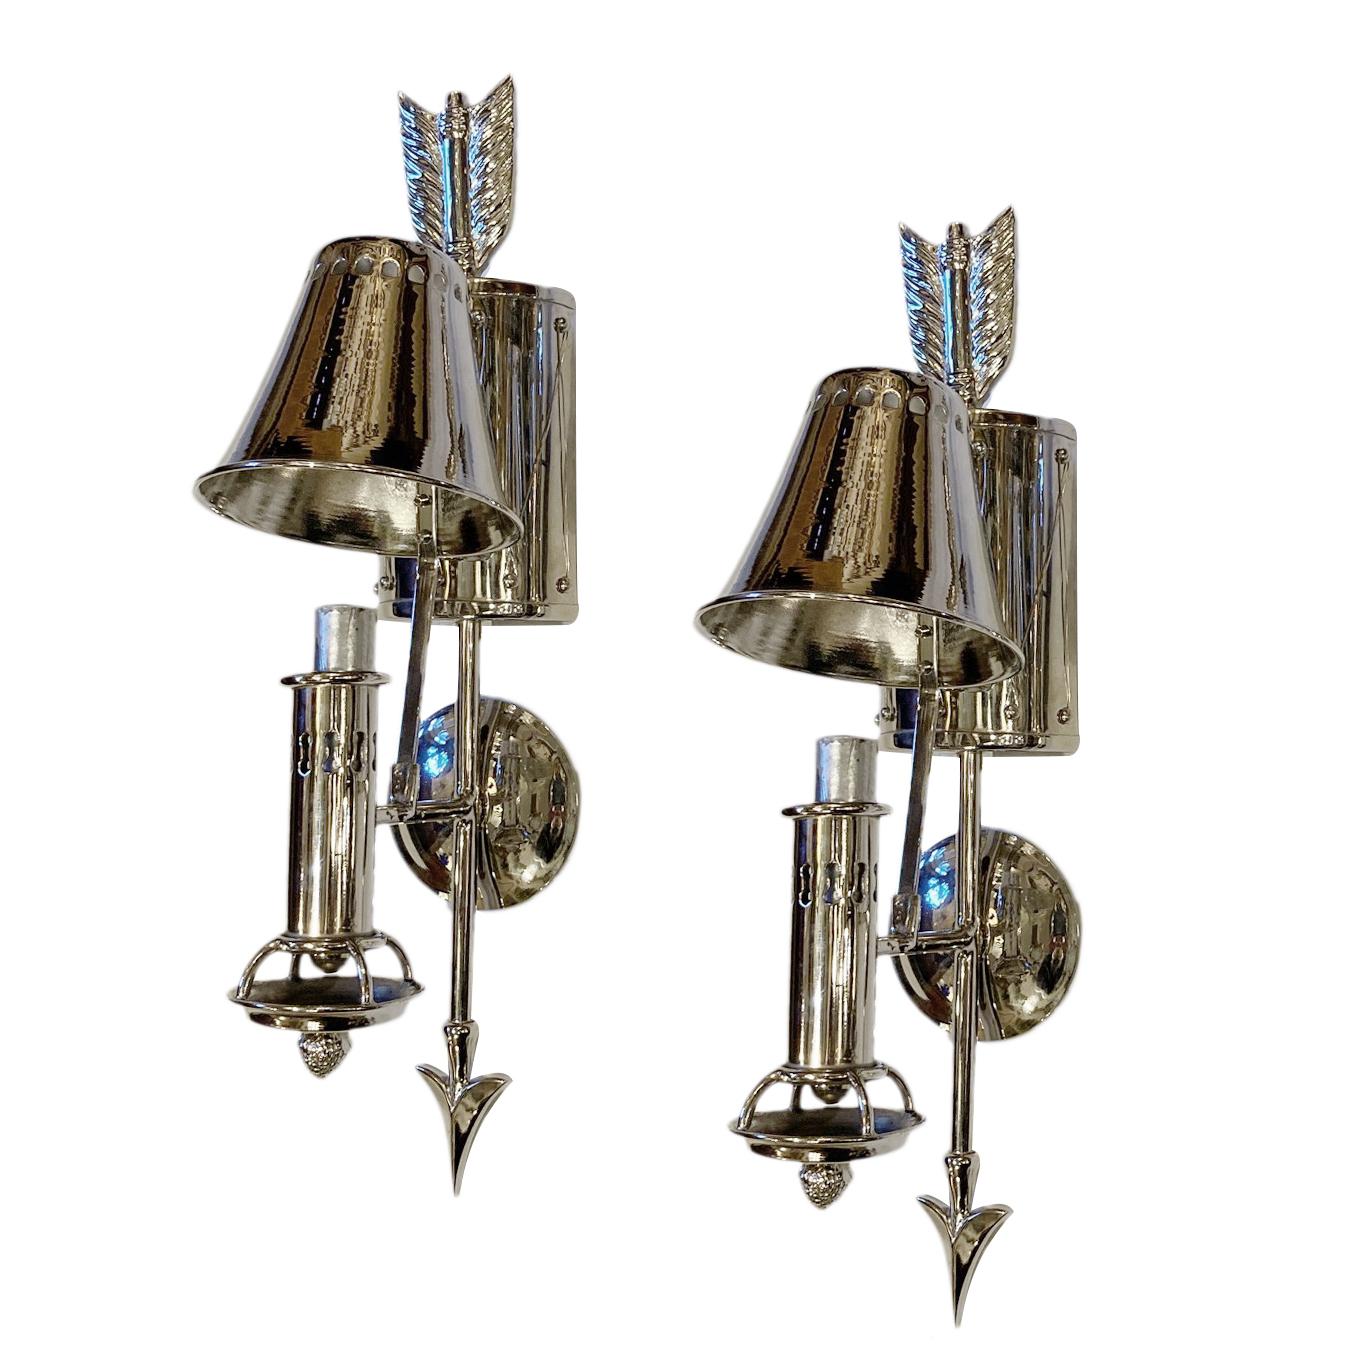 Set of four circa 1940's French silver-plated metal sconces with drum and arrow design. Sold per pair.

Measurements:
Height: 19